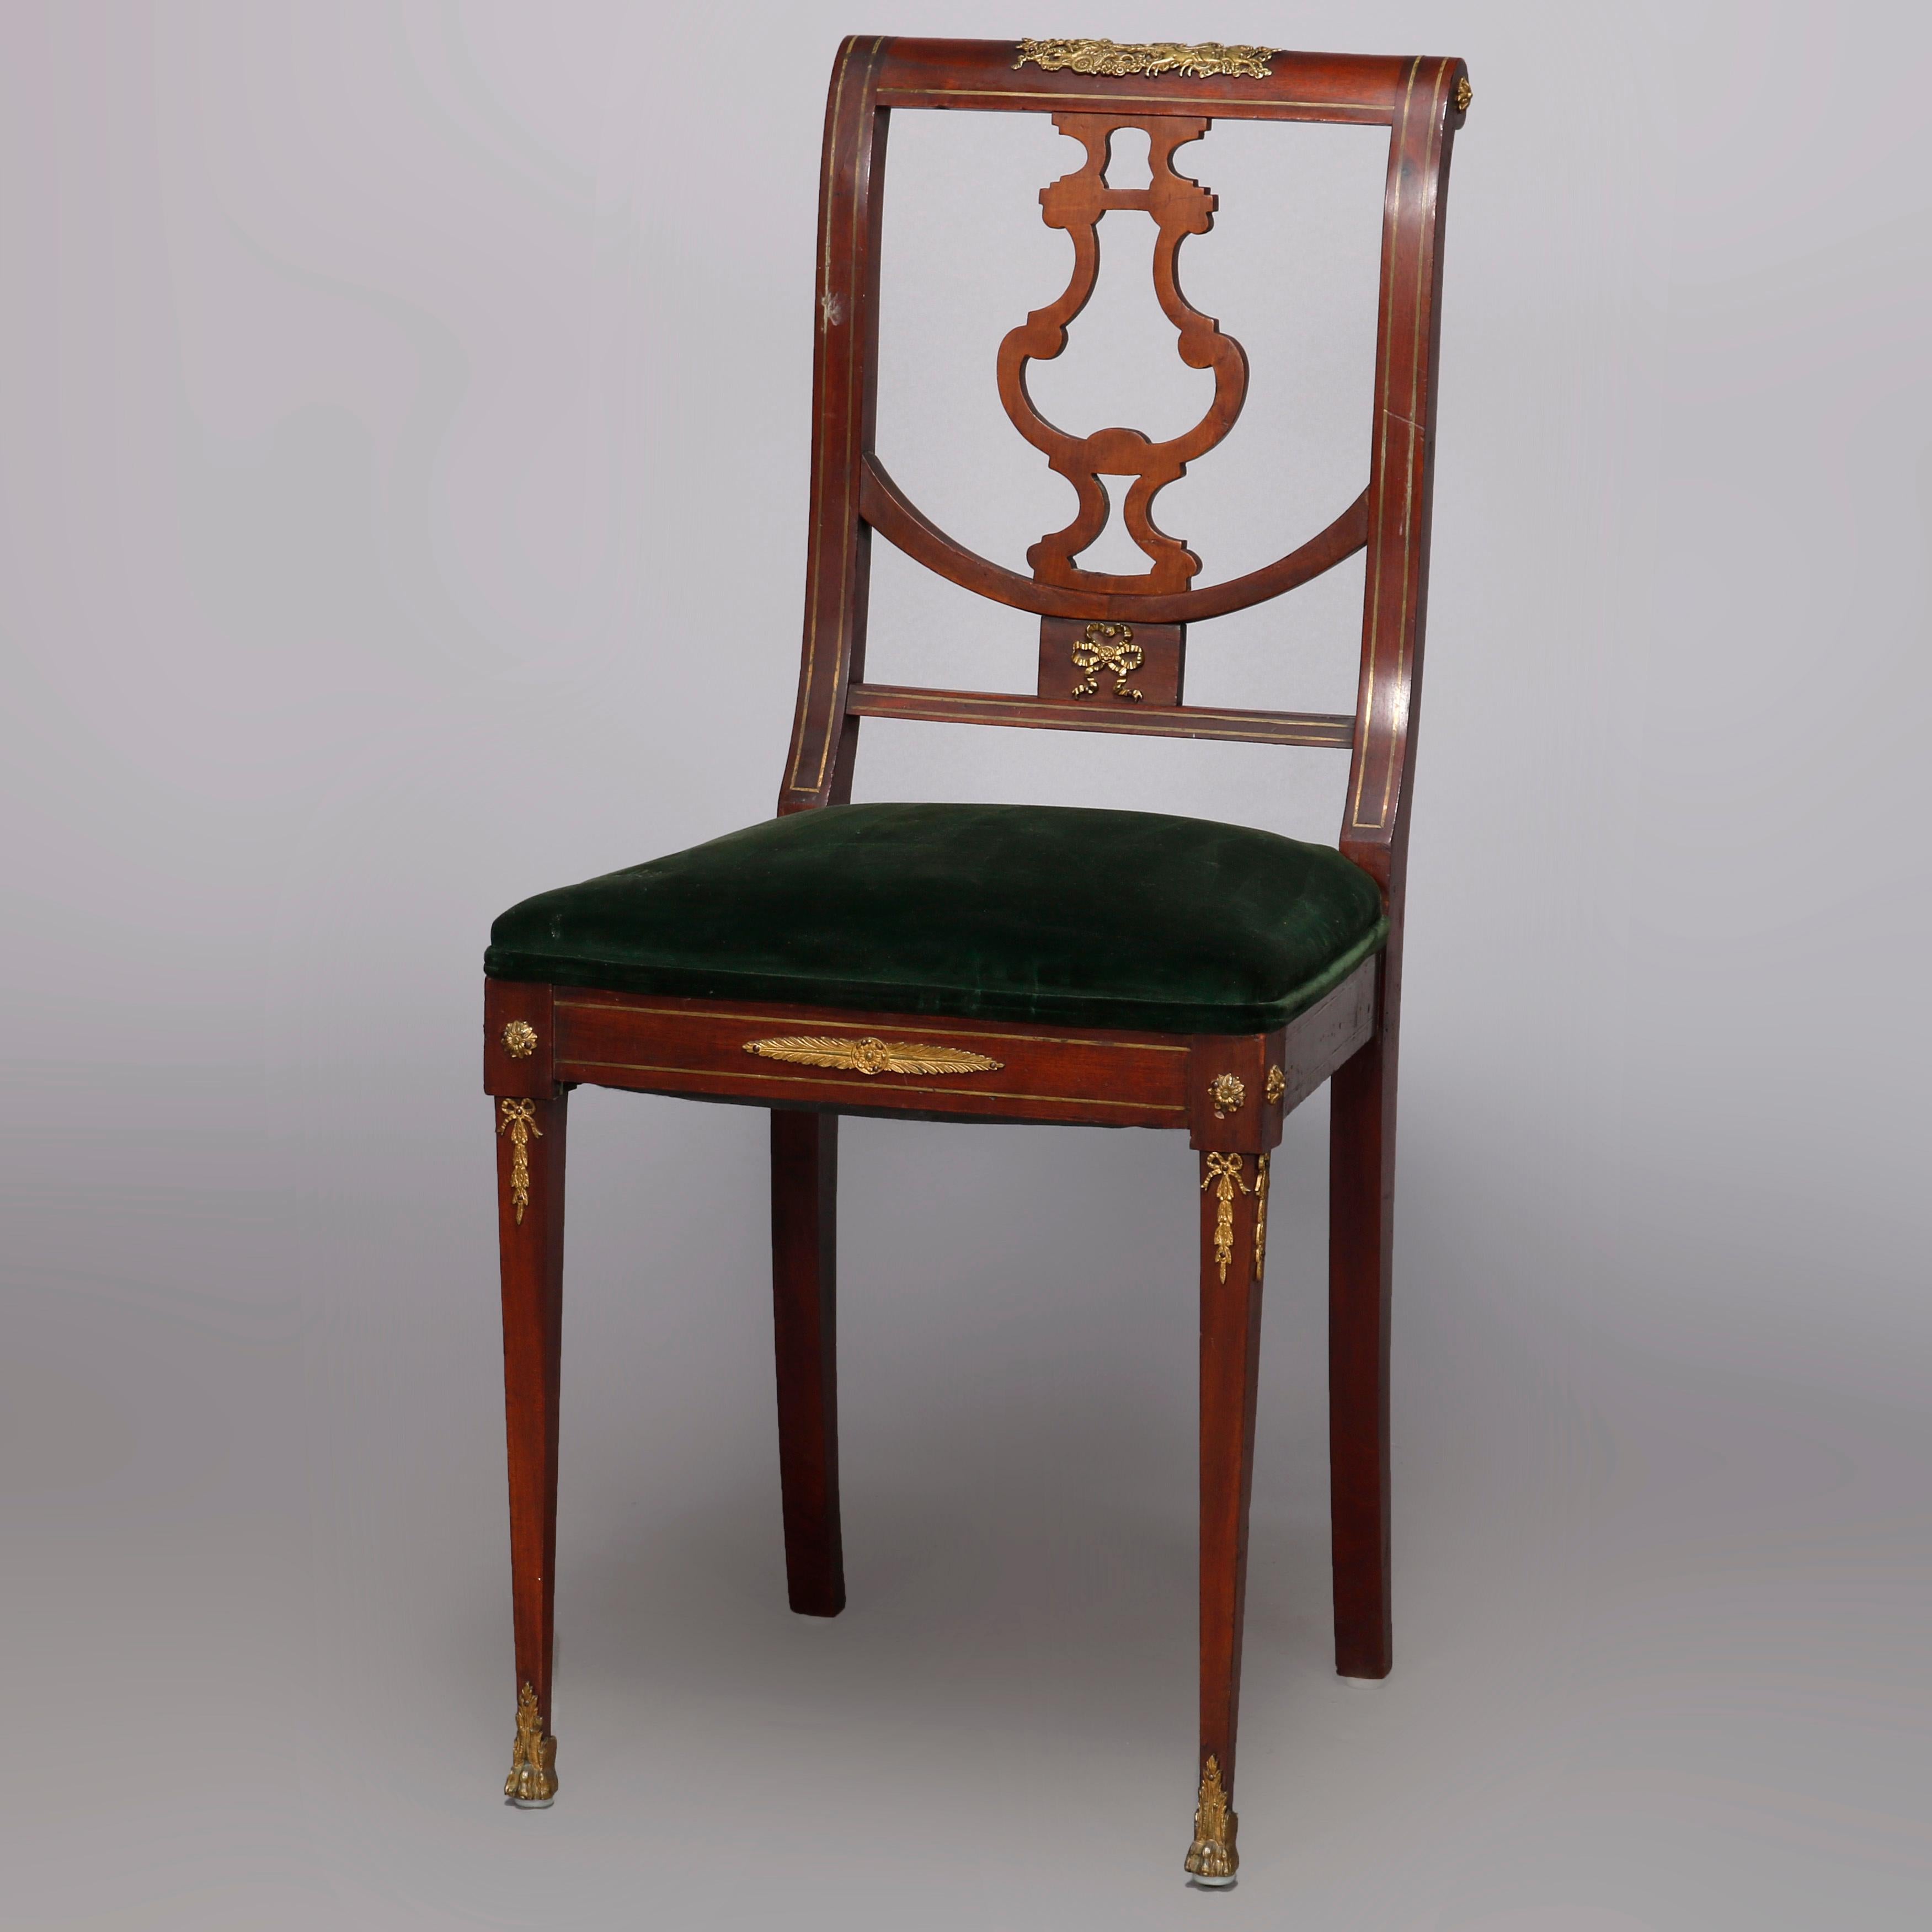 Antique French Empire Mahogany Side chair with Ormolu Mounts 19th C For Sale 5